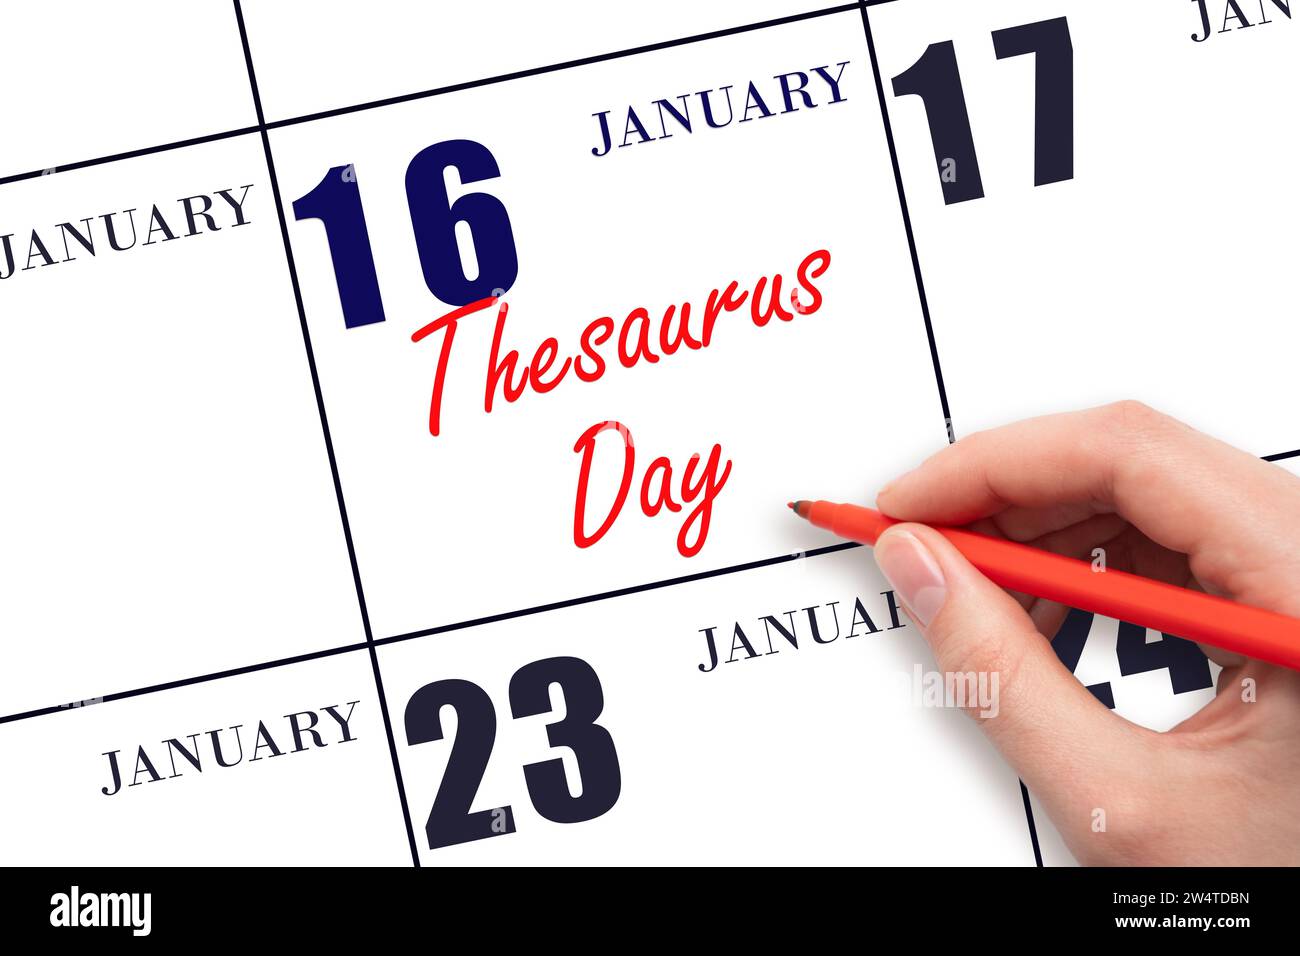 January 16. Hand writing text Thesaurus Day on calendar date. Save the date. Holiday.  Day of the year concept. Stock Photo